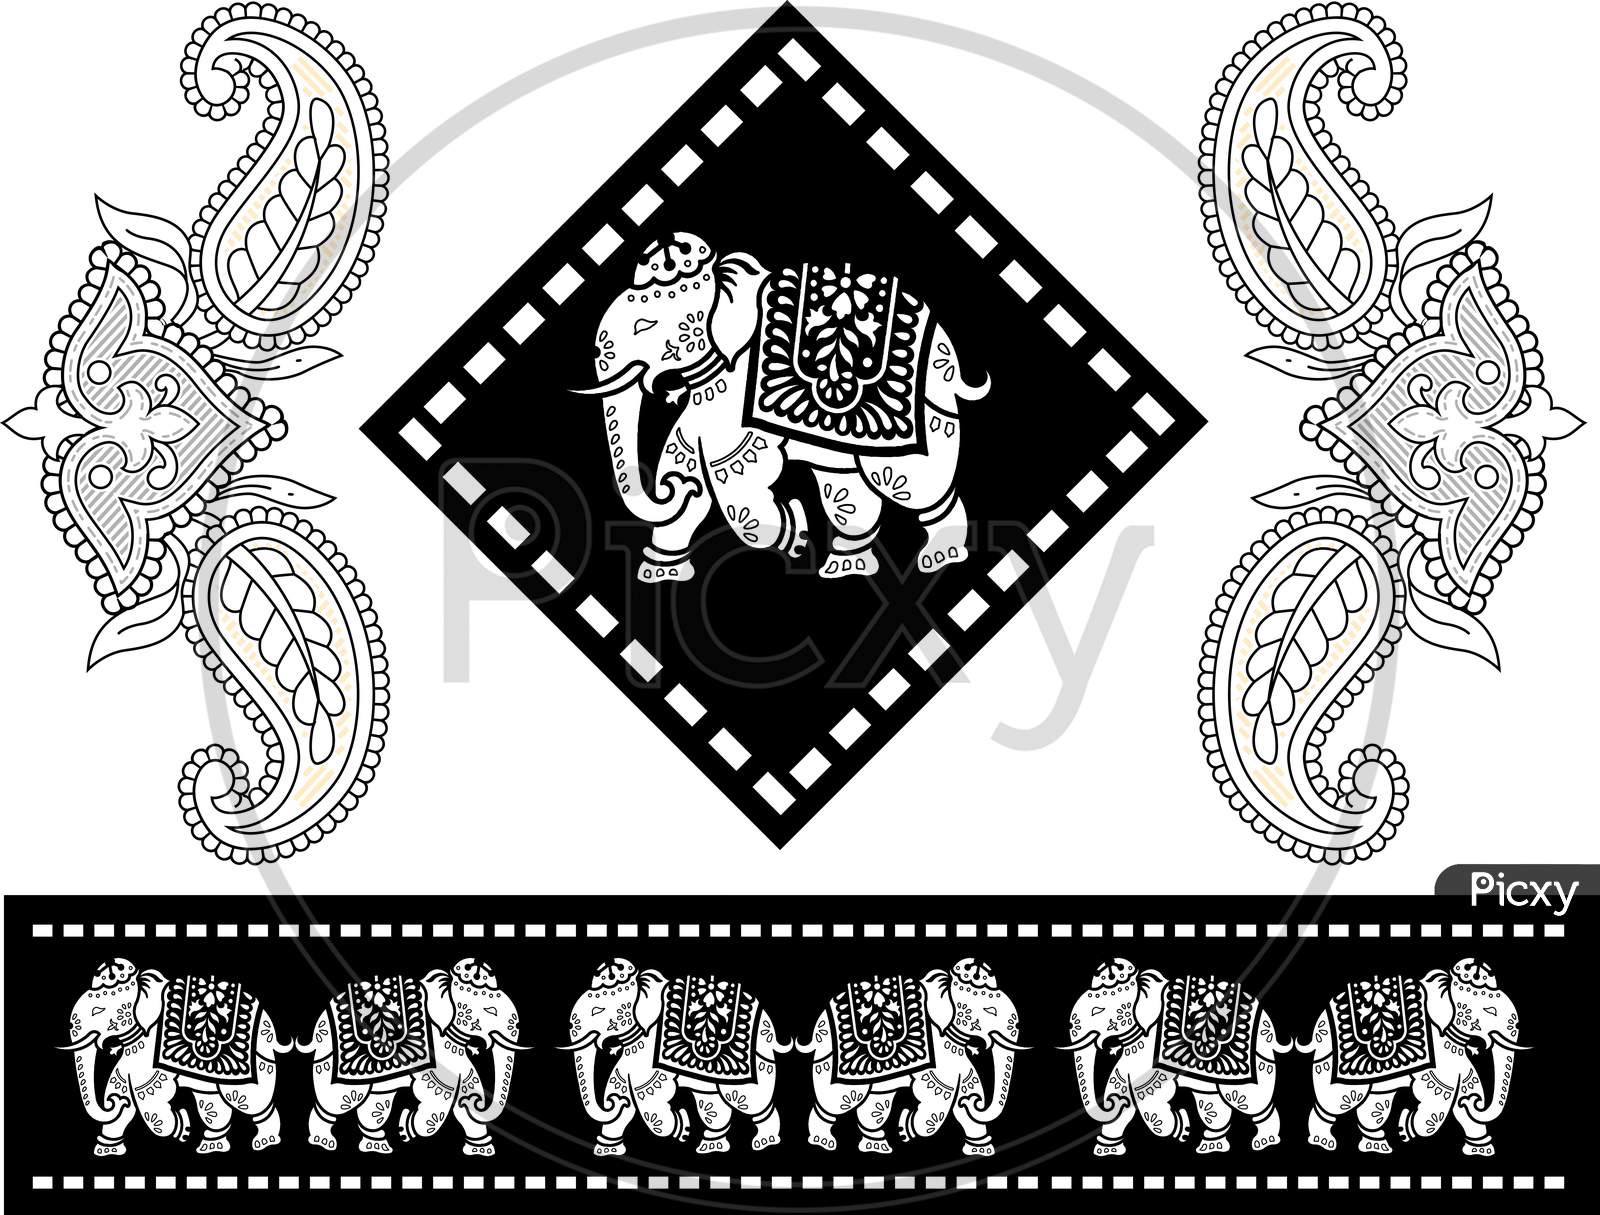 Tribal Pattern Elephant Paisley Design, Royalty Free Cliparts, Stock Illustration With Seamless Border